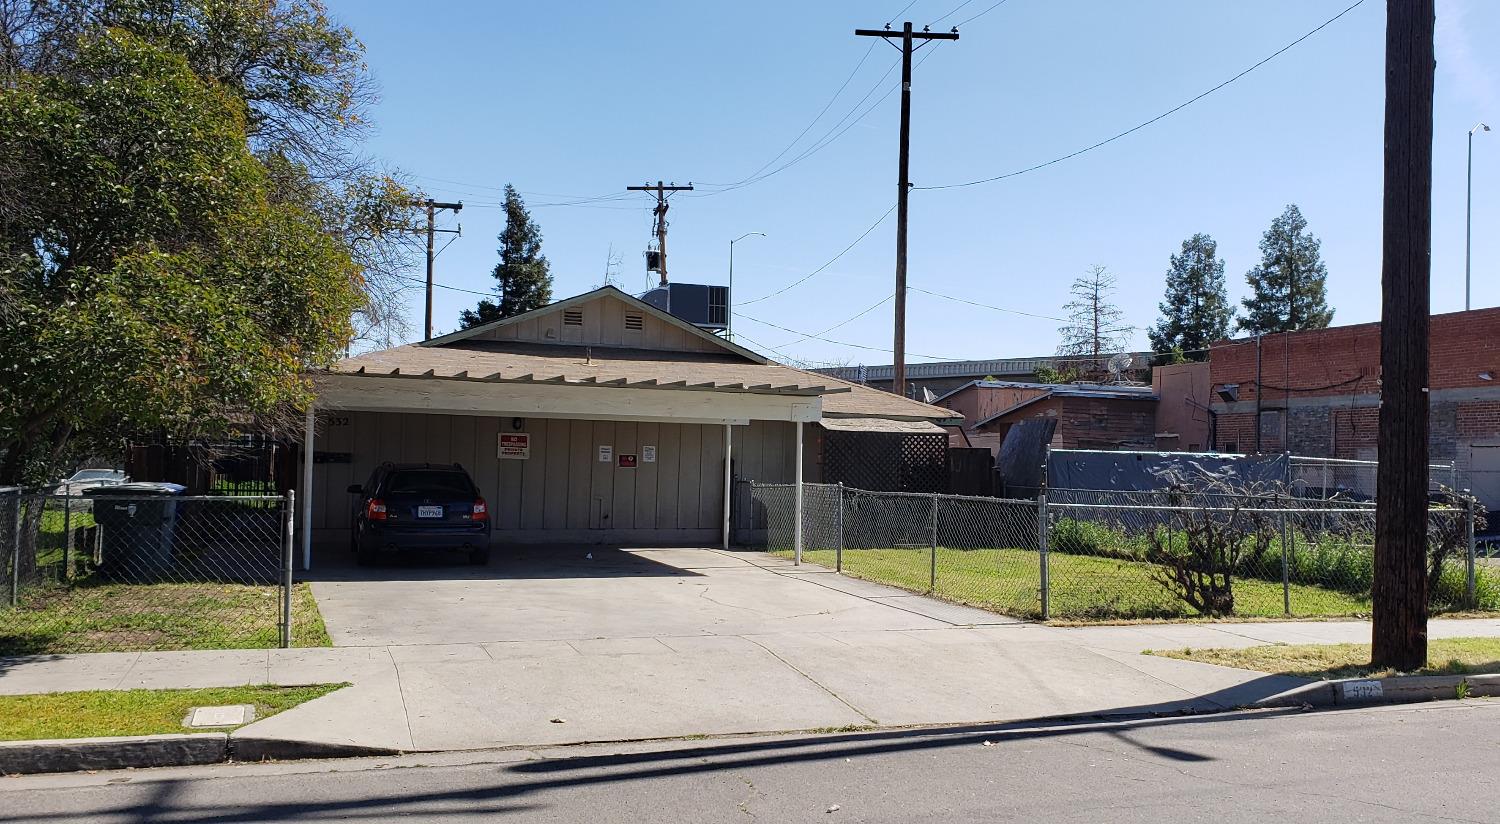 Photo of 532 N College Ave in Fresno, CA